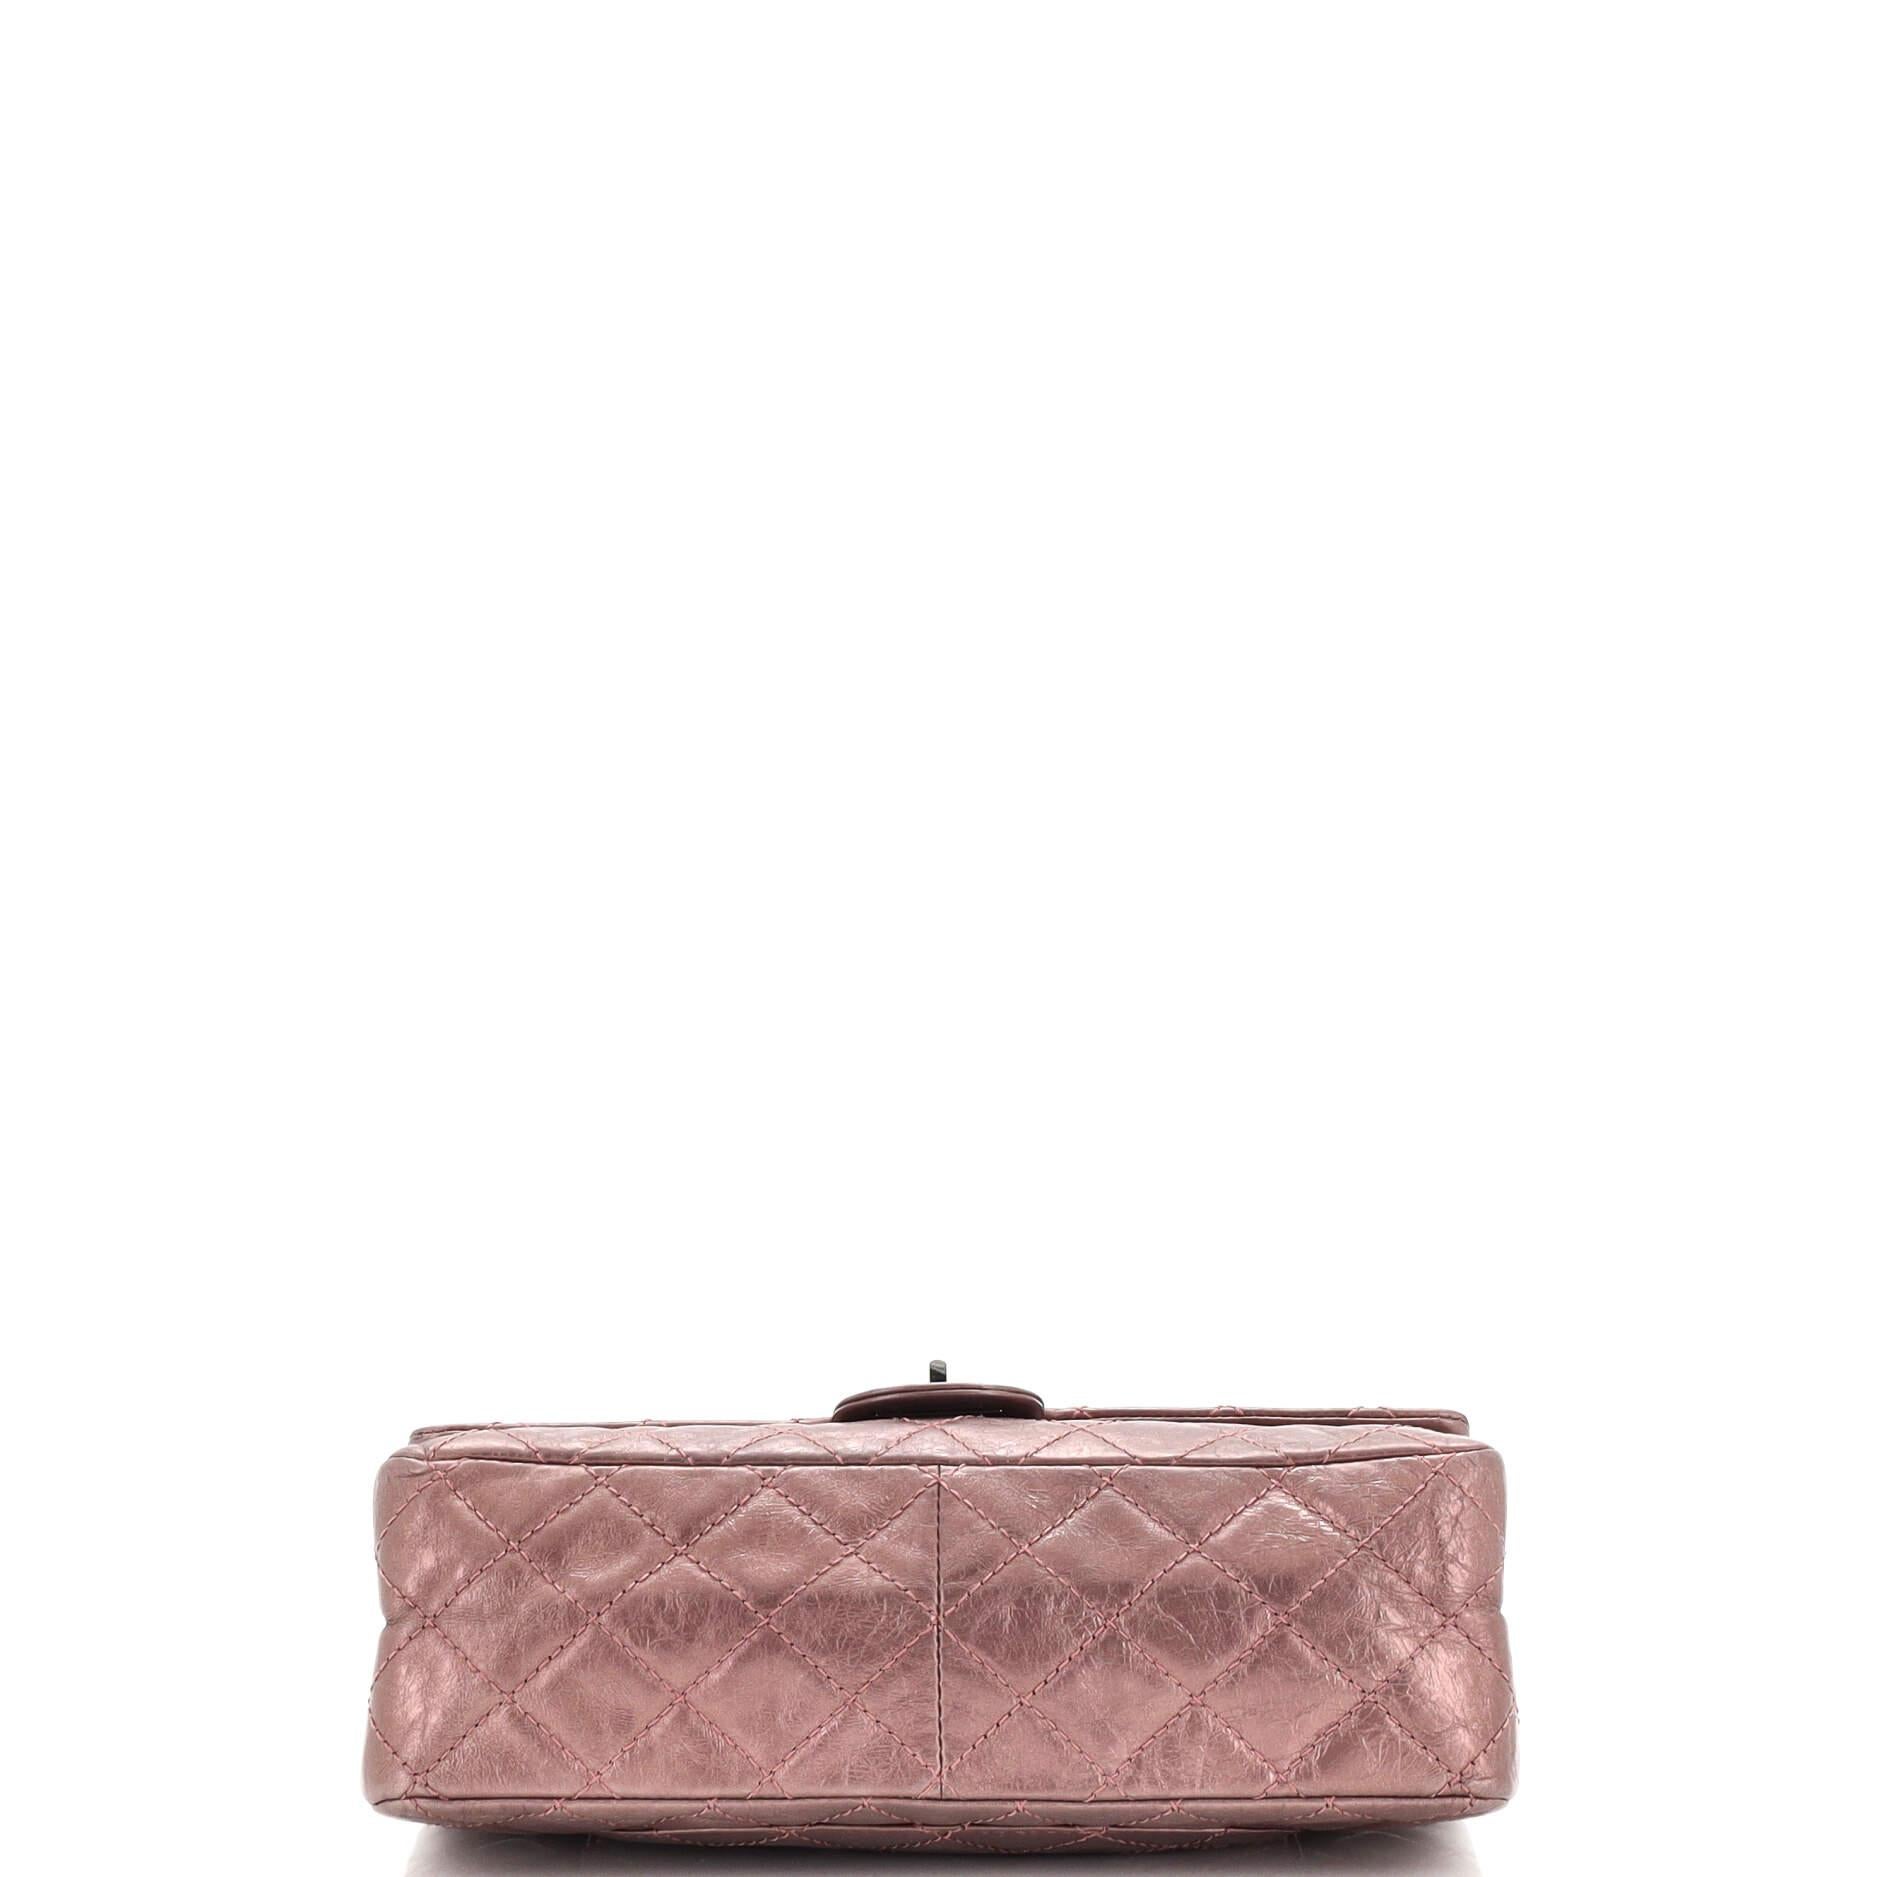 Chanel Reissue 2.55 Flap Bag Quilted Aged Calfskin 226 For Sale 1